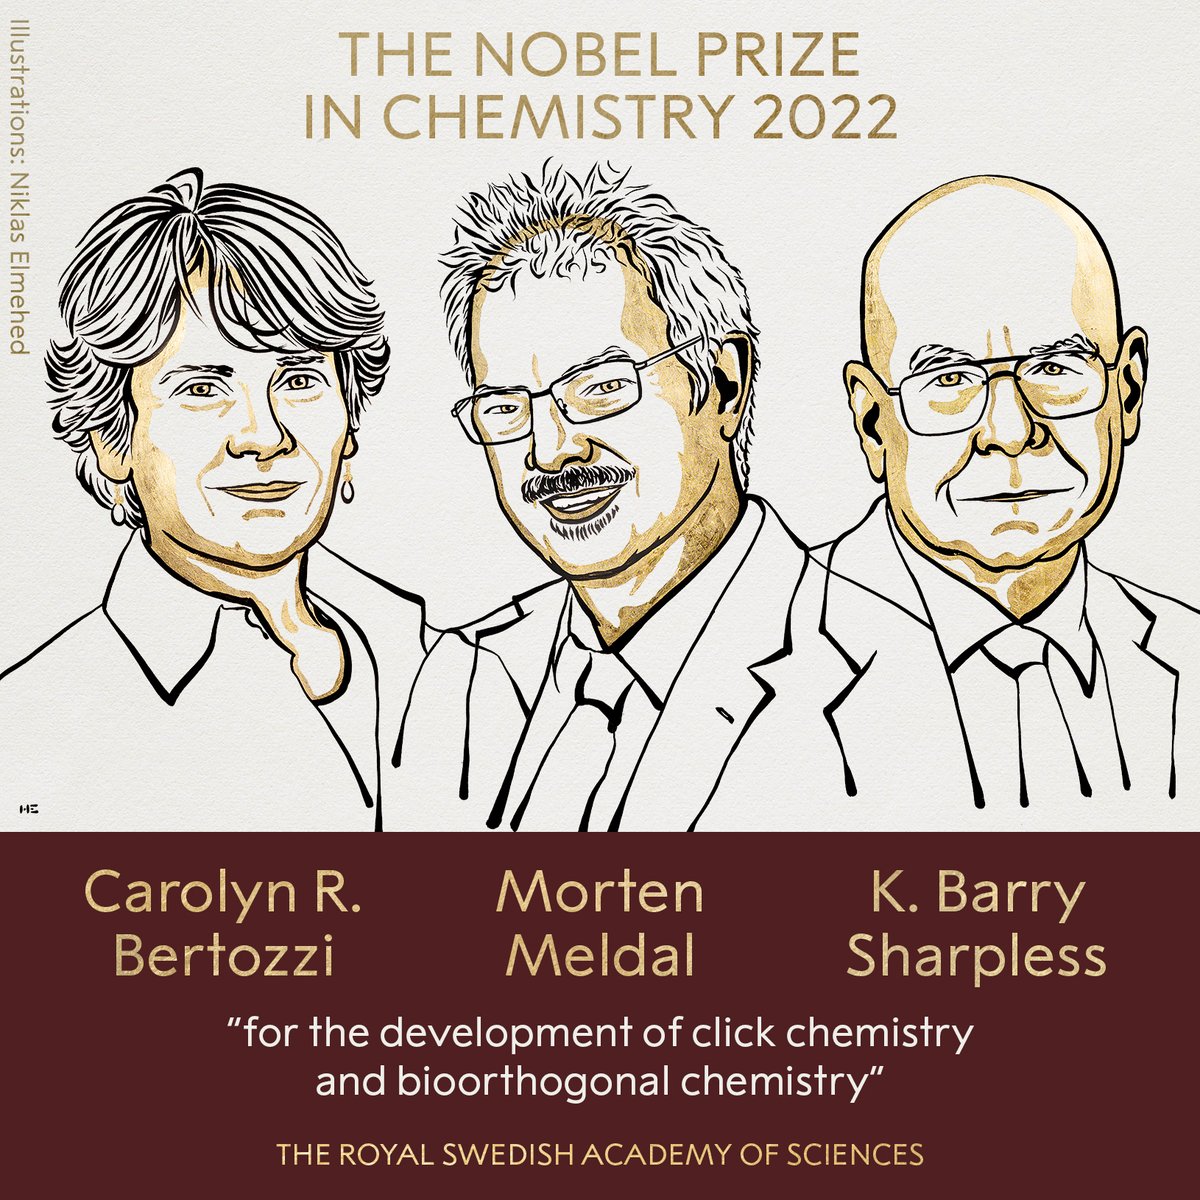 BREAKING NEWS: The Royal Swedish Academy of Sciences has decided to award the 2022 #NobelPrize in Chemistry to Carolyn R. Bertozzi, Morten Meldal and K. Barry Sharpless “for the development of click chemistry and bioorthogonal chemistry.”